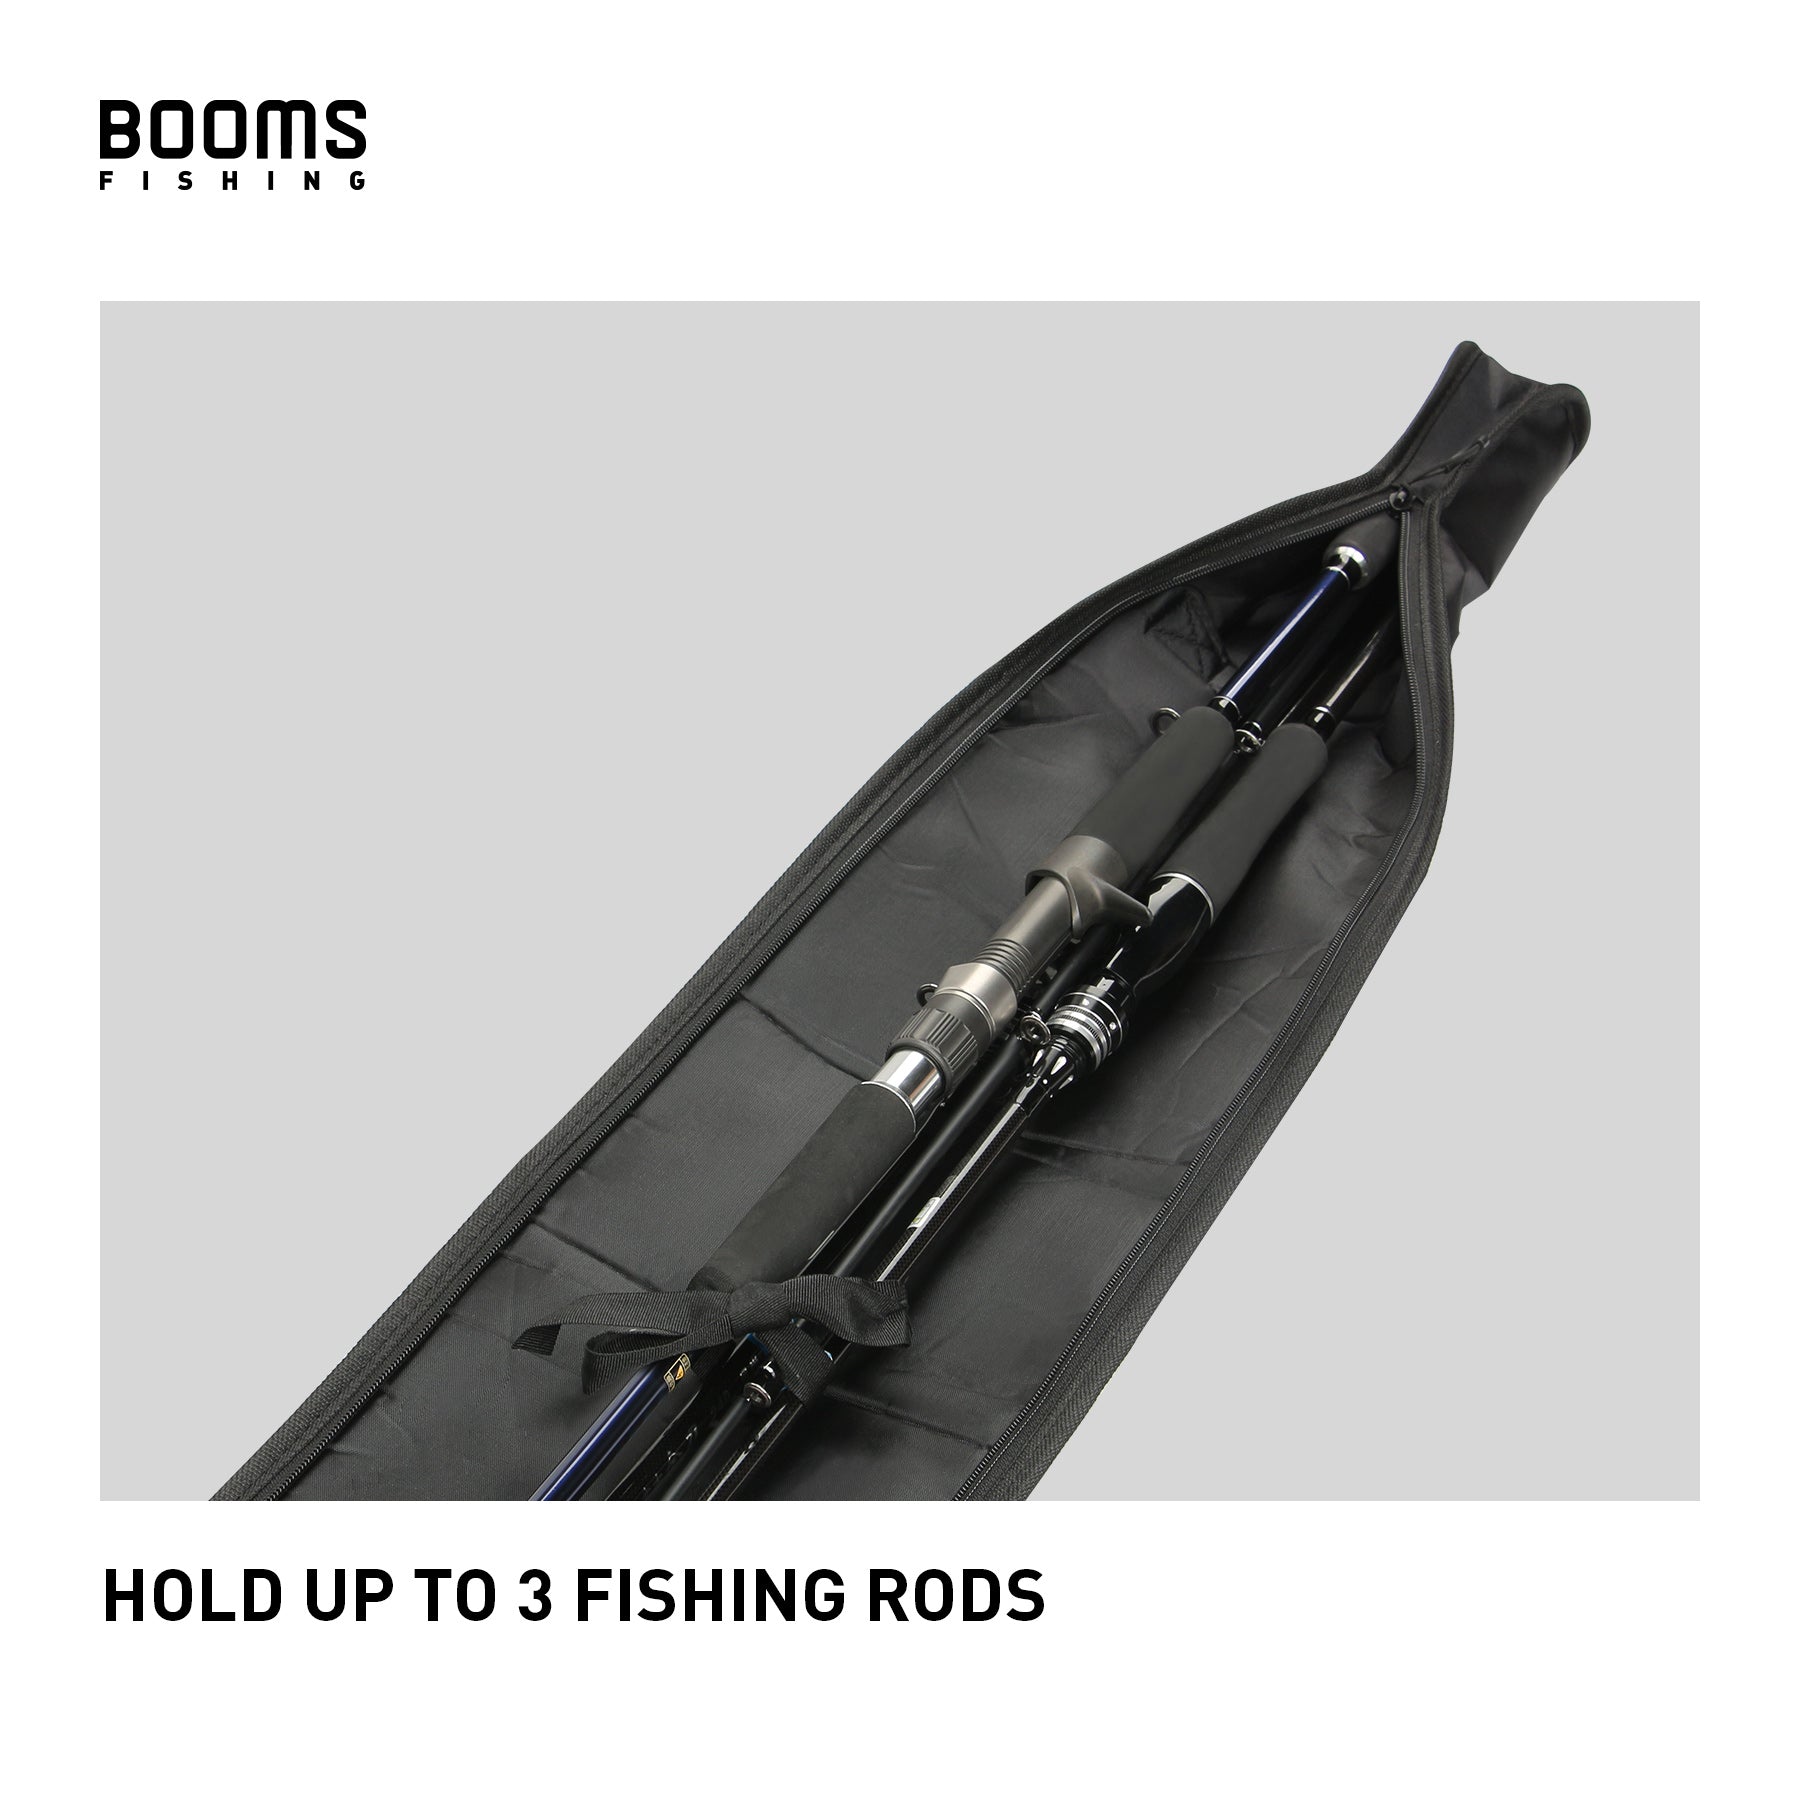 Nash Scope Ops 3 Rod Case - Rod Case for Three Fishing Rods - Rod Bag 10ft  with Bank Stick Holder and Umbrella Compartment for Hanging